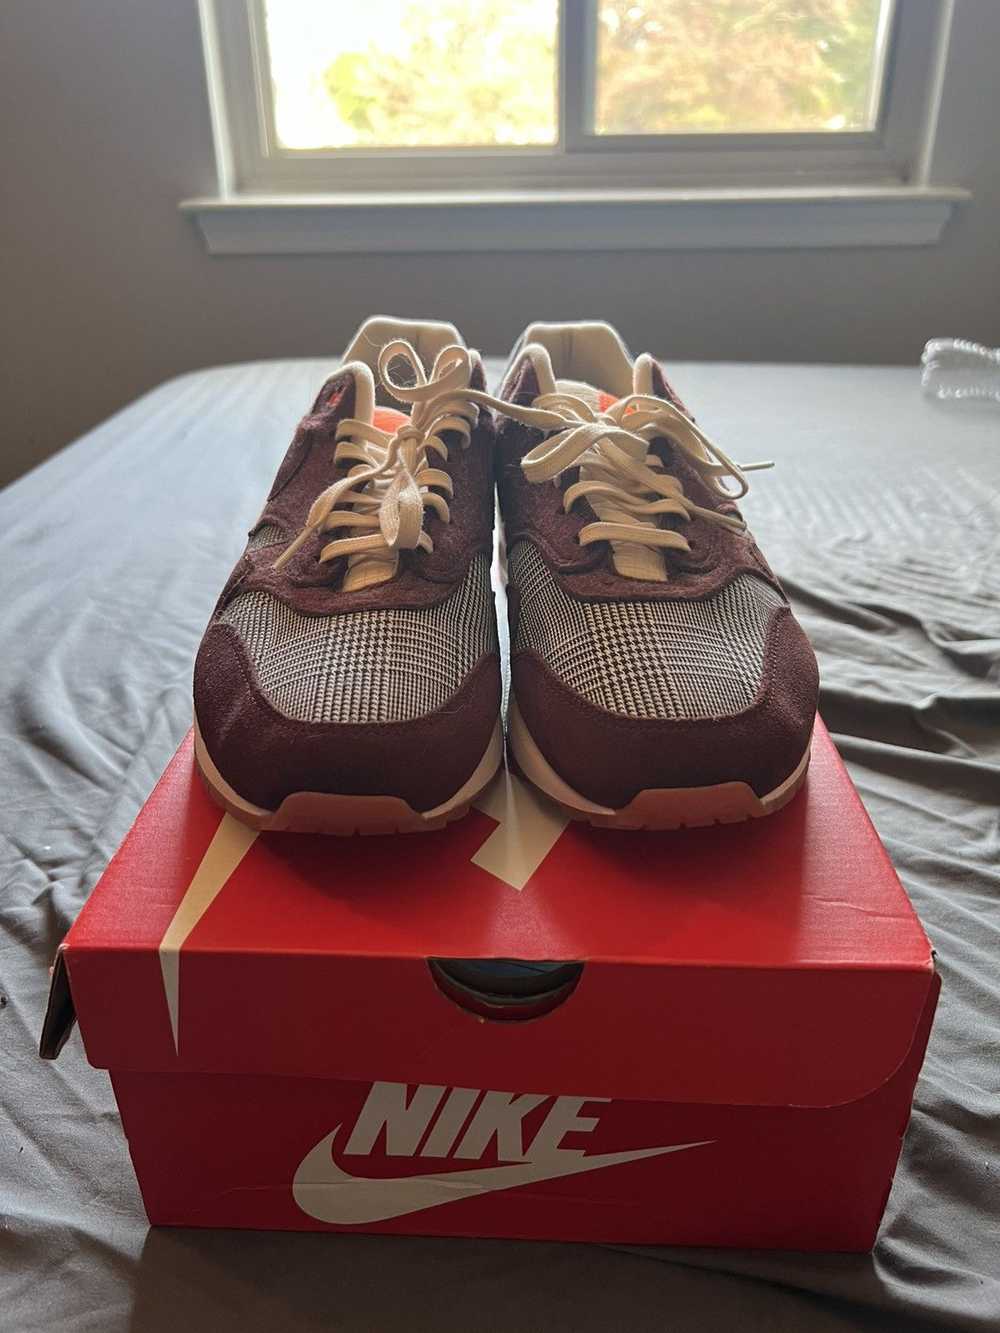 Nike Nike Air Max 1 Houndstooth Bronze Eclipse - image 2